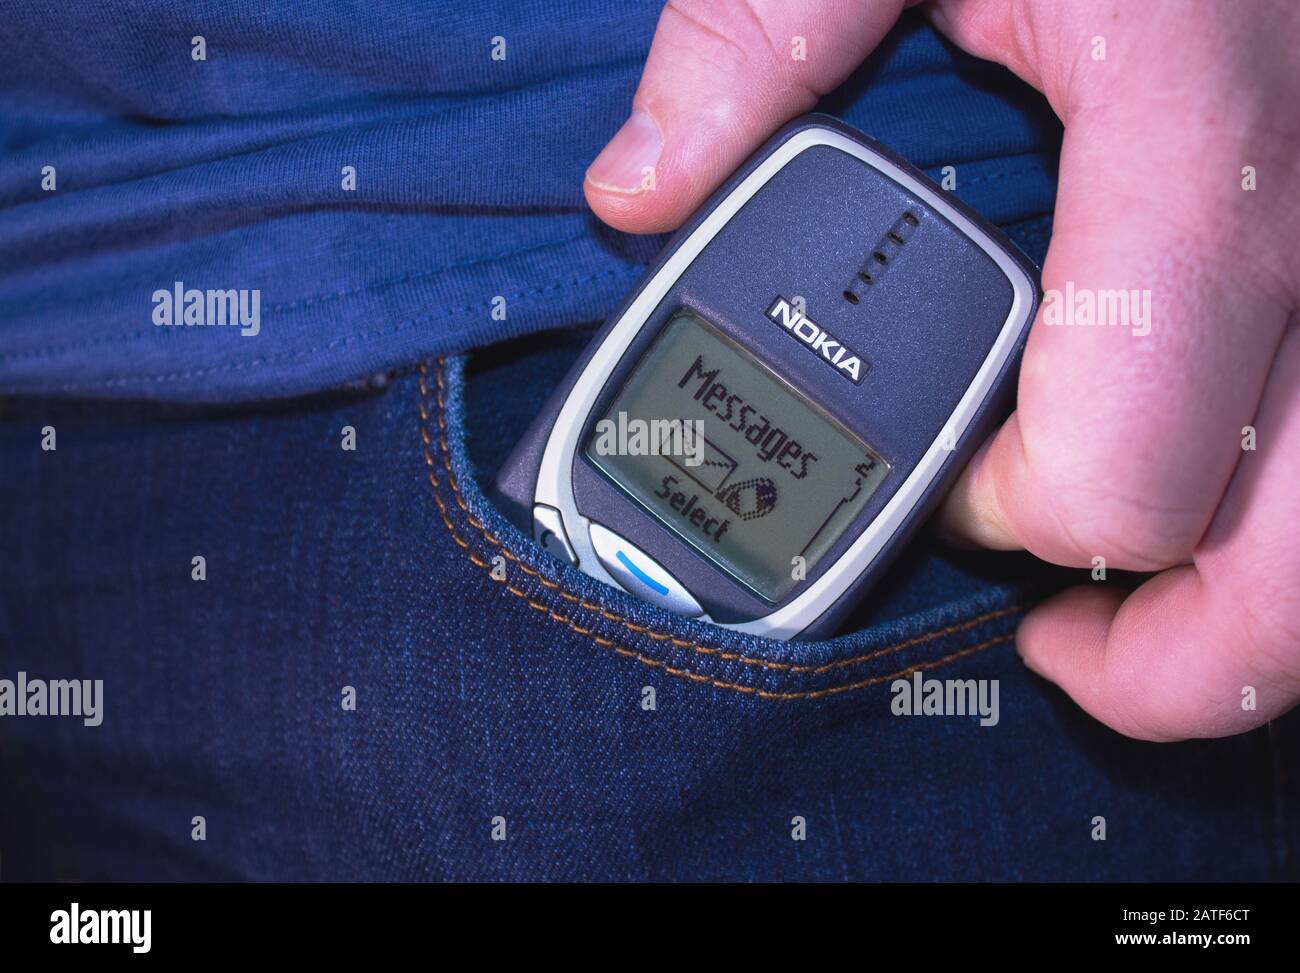 Petrozavodsk. Karelia. Russia. January 8. 2020: Man's hand takes an old Nokia cell phone with a message on the screen out of blue jeans pocket Stock Photo